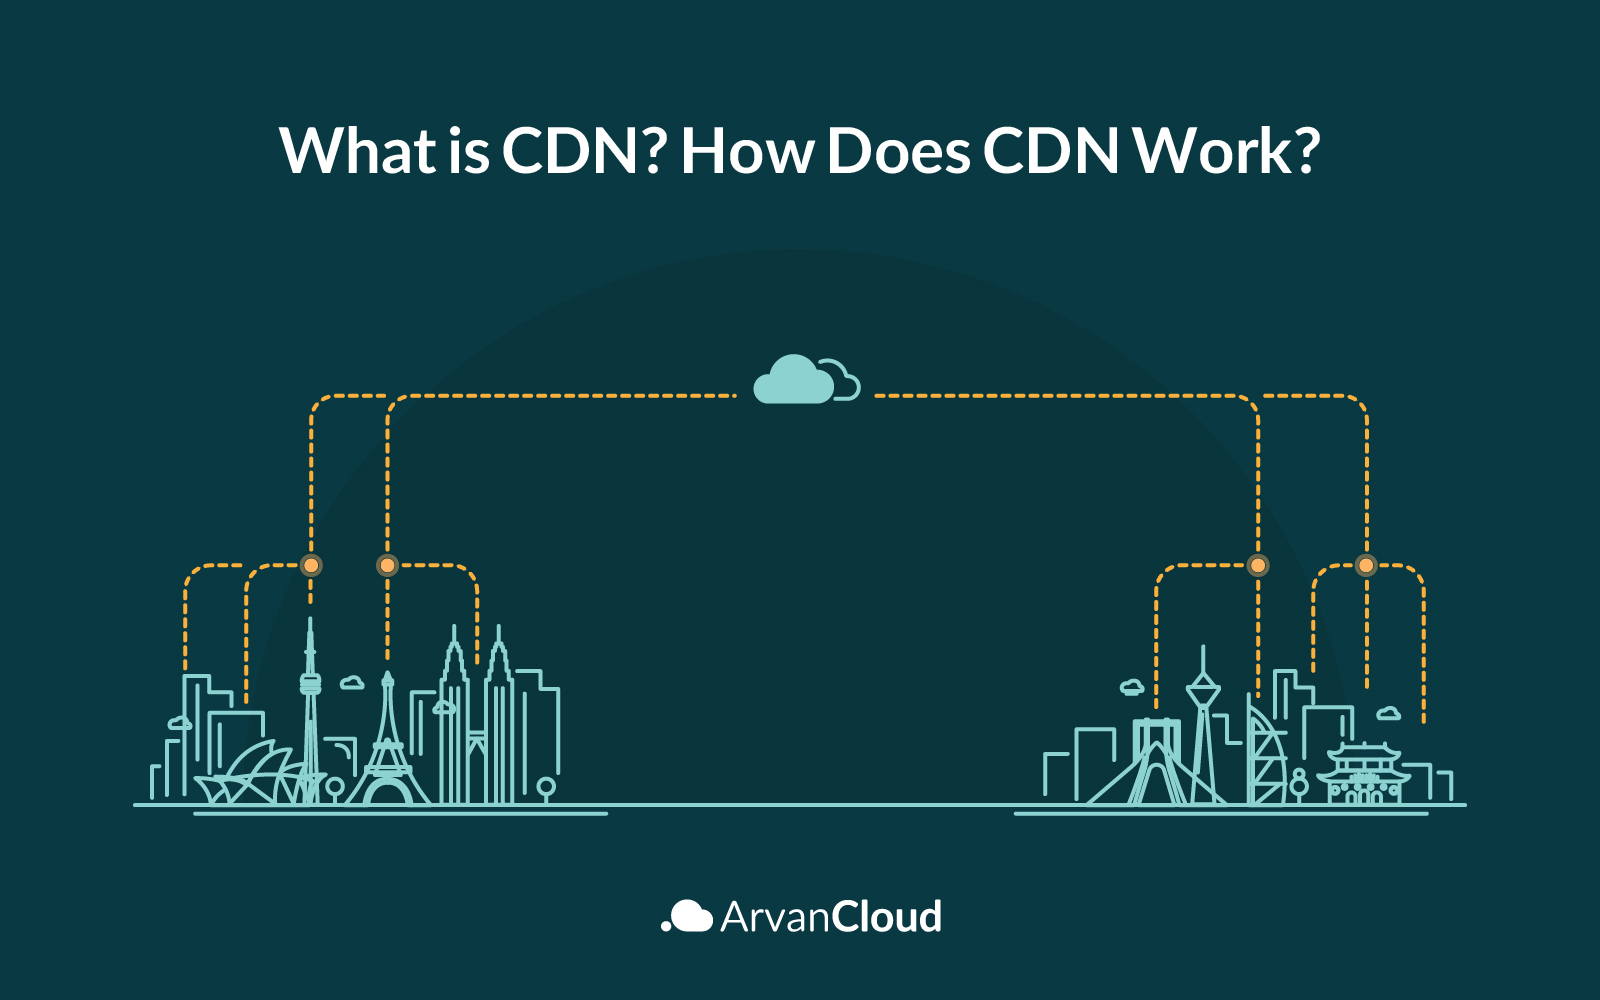 What is CDN and how does a CDN Work?